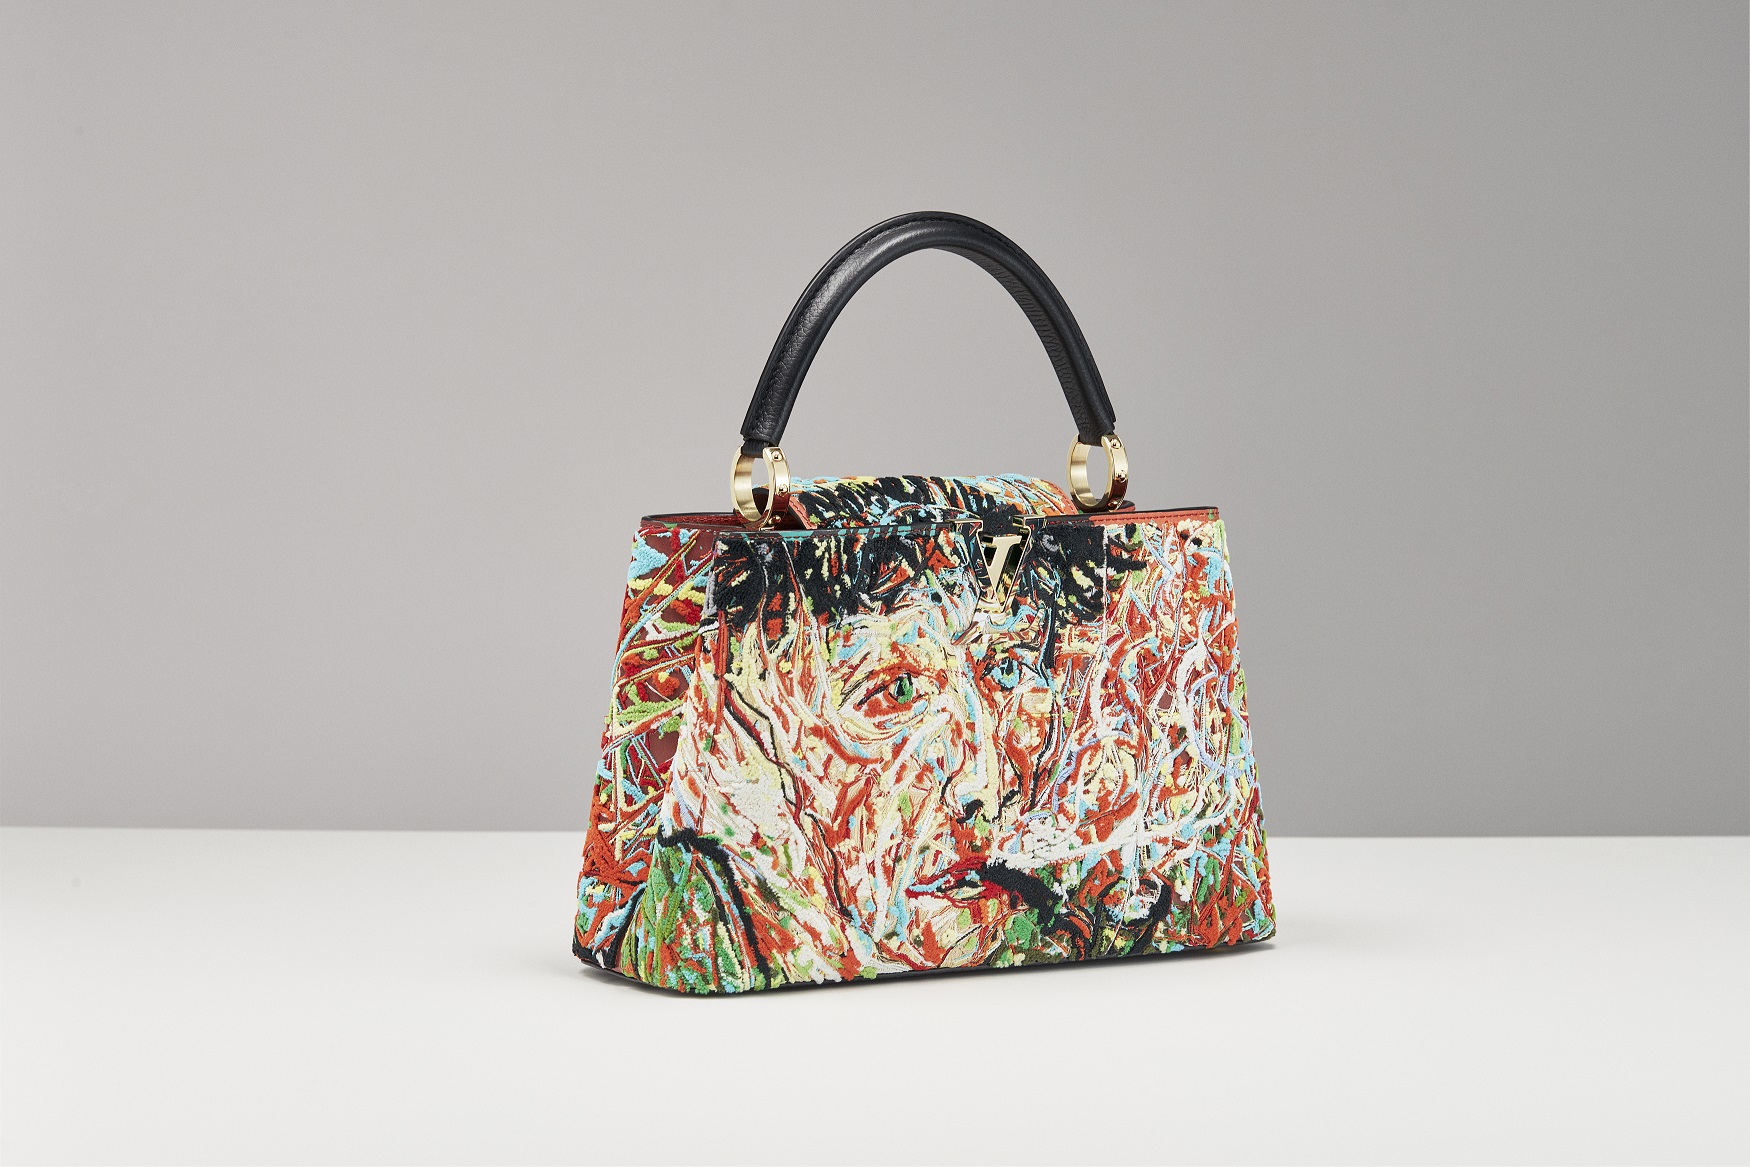 Louis Vuitton unveils the fifth edition of Artycapucines